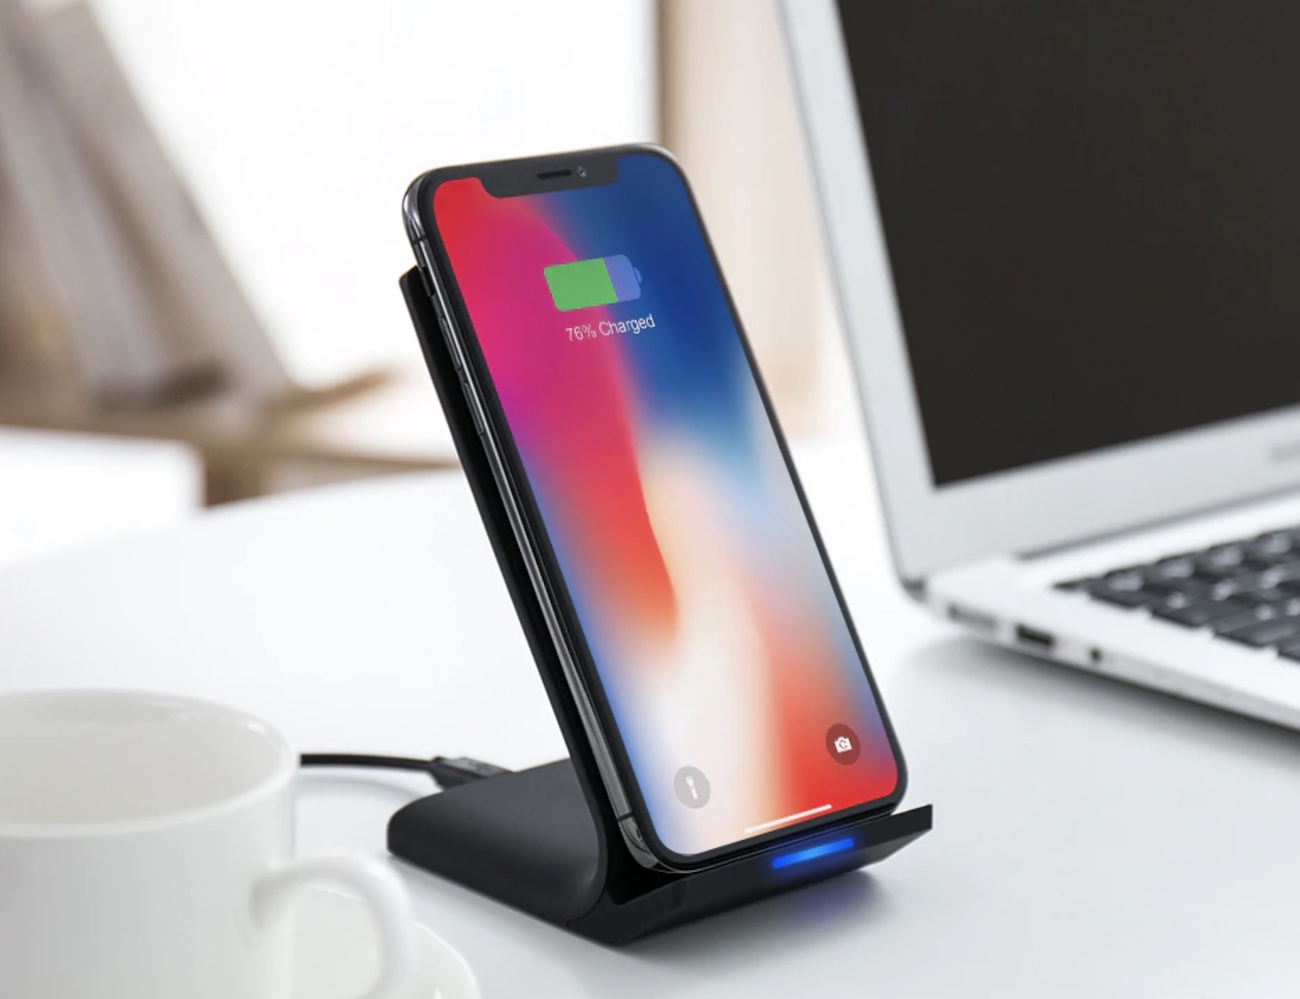 10W Fast Wireless iPhone Charger looks as brilliant as it functions